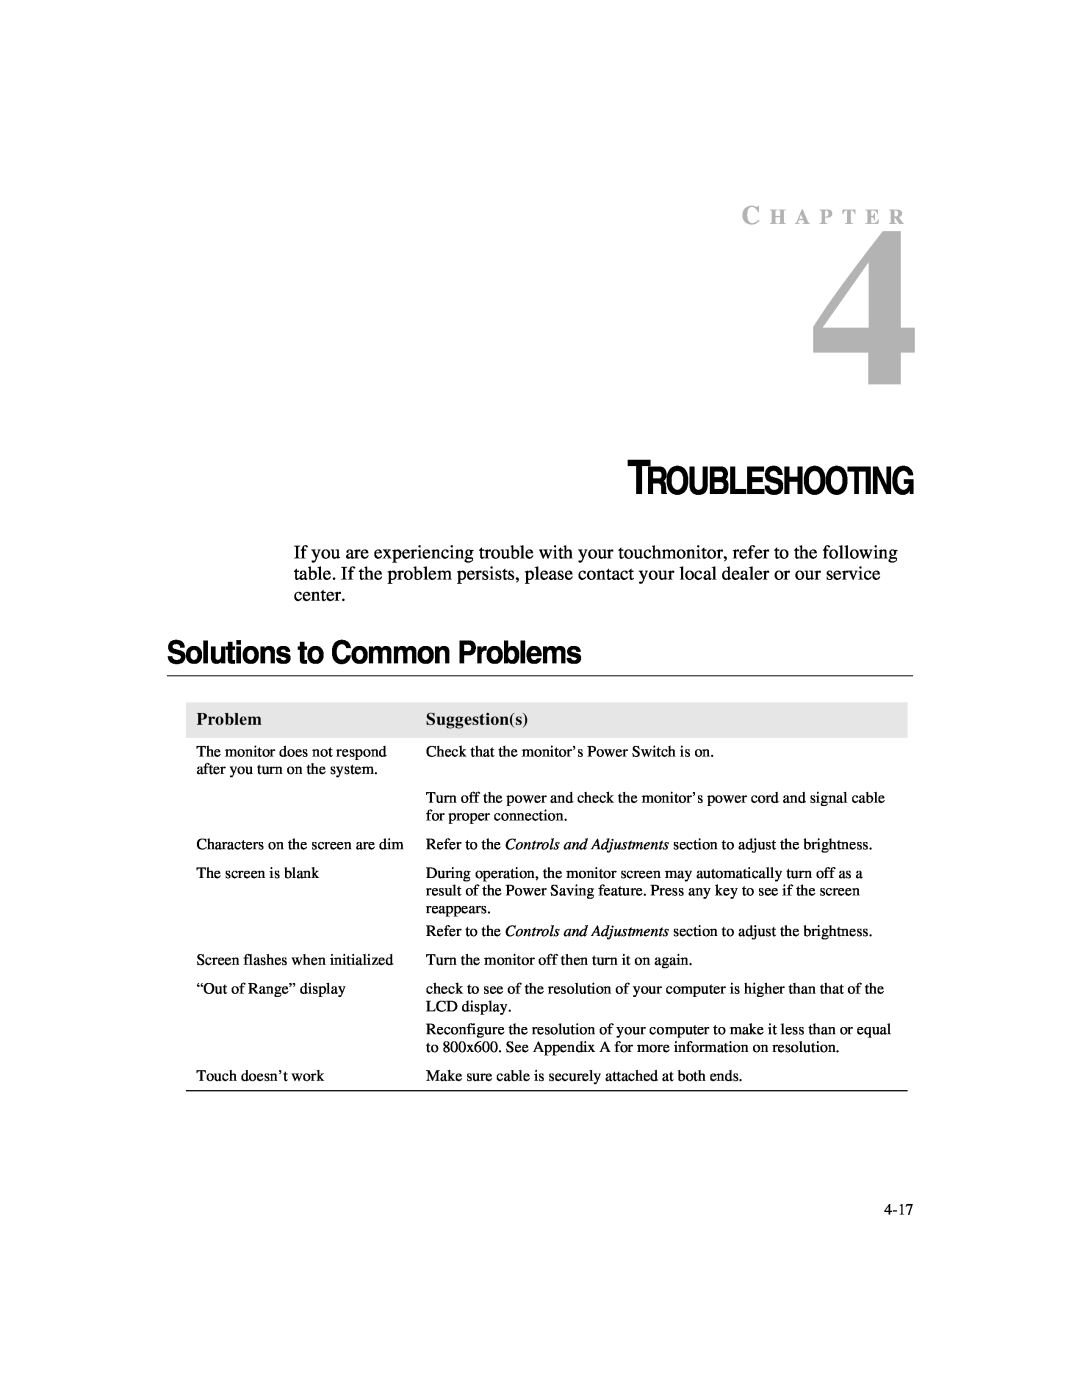 Elo TouchSystems 1247L manual Troubleshooting, Solutions to Common Problems, C H A P T E R, Suggestions 